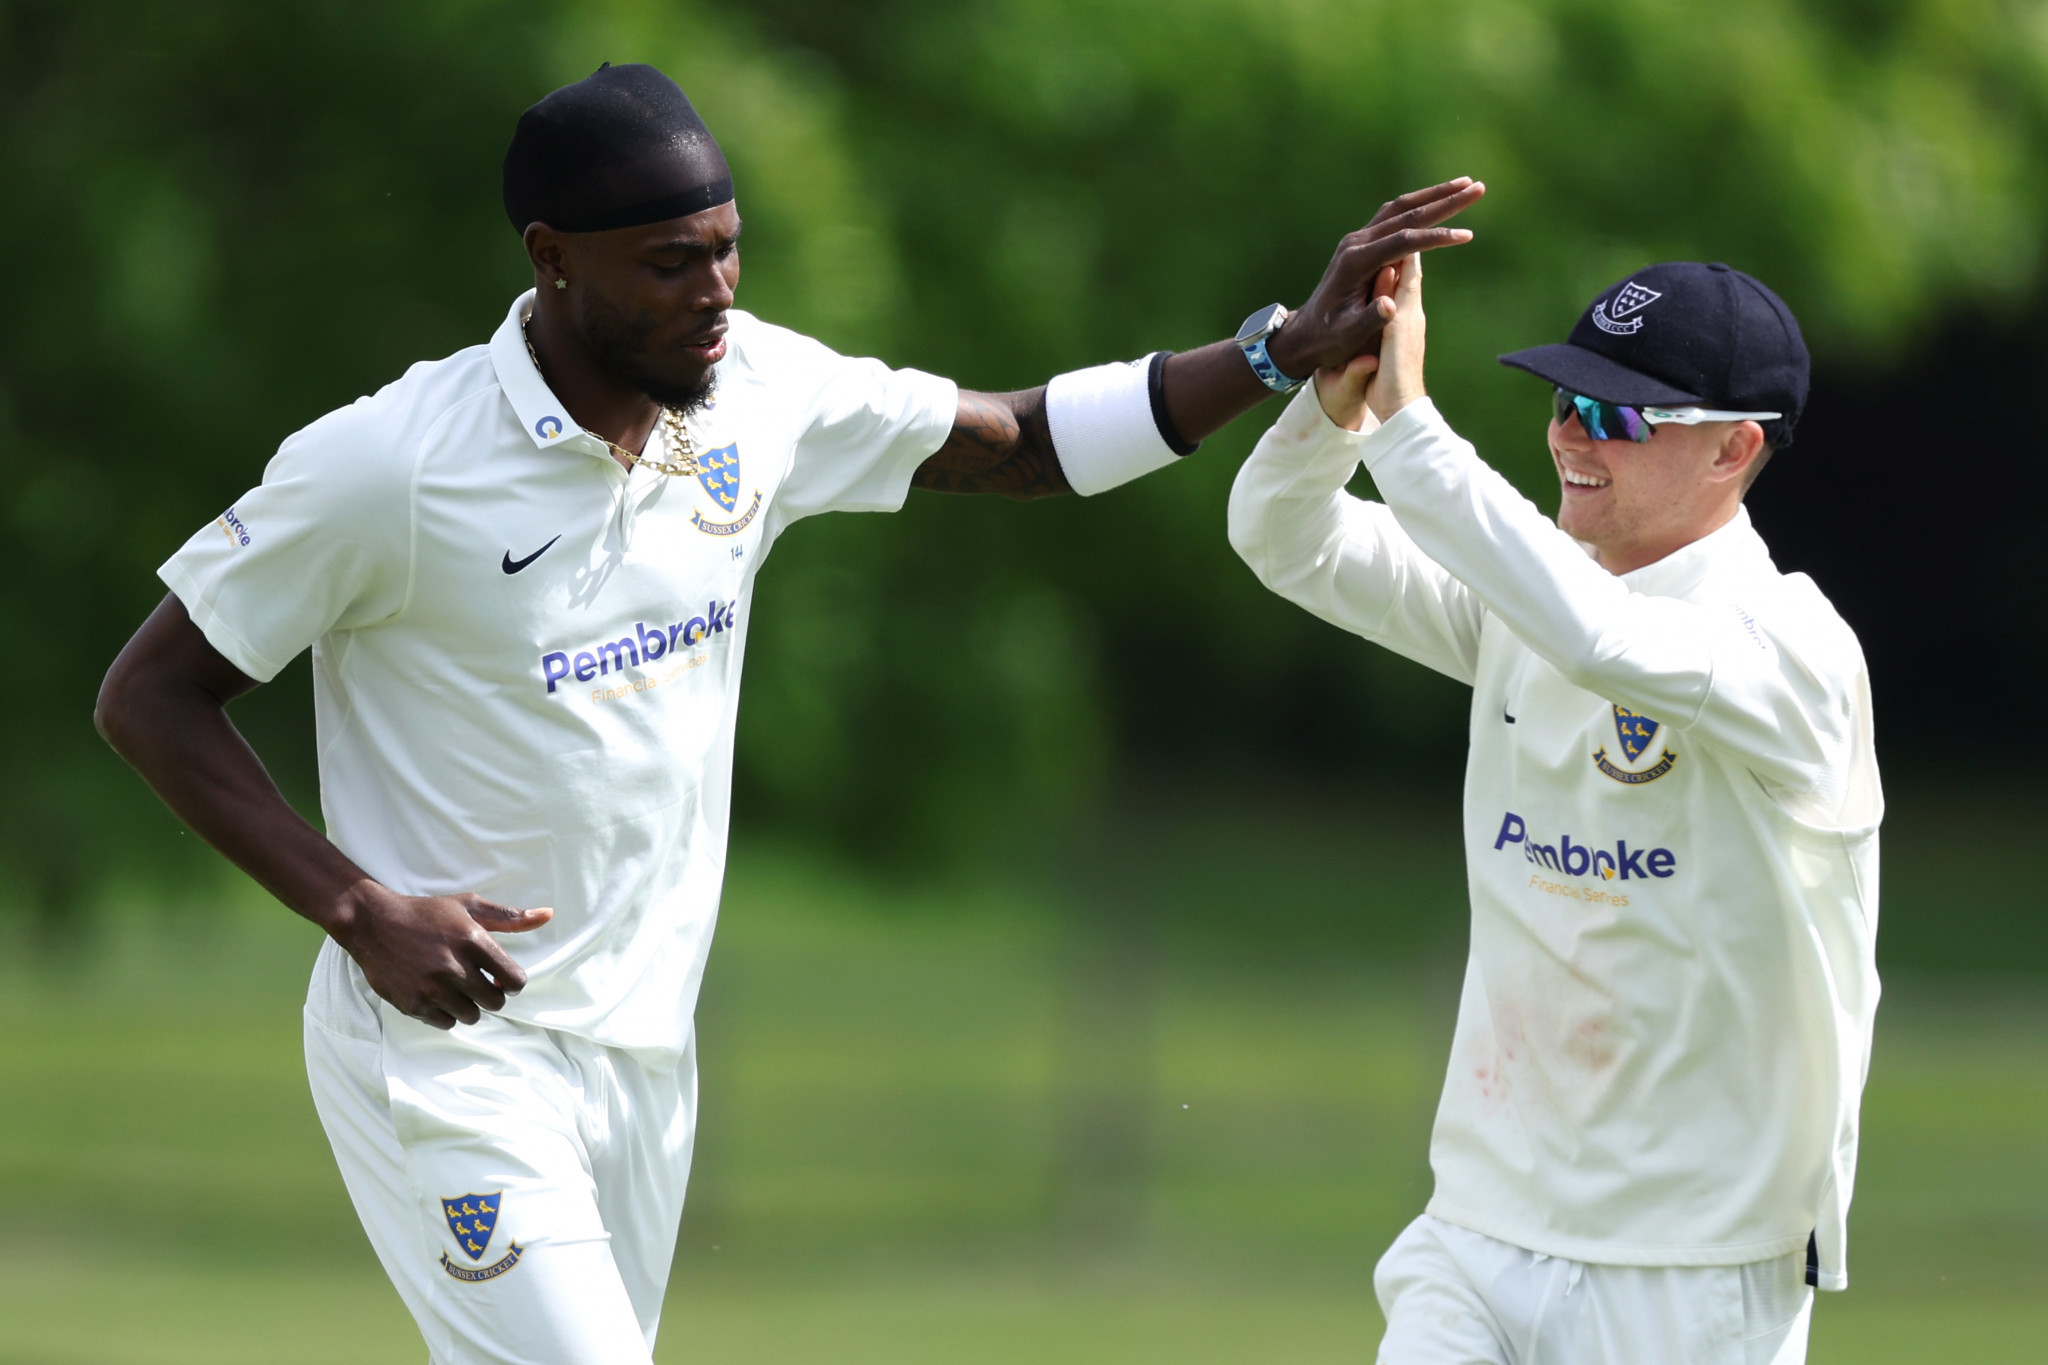 England cricketer Jofra Archer (left) recently took a wicket for Sussex on his recent return from injury. GETTY IMAGES